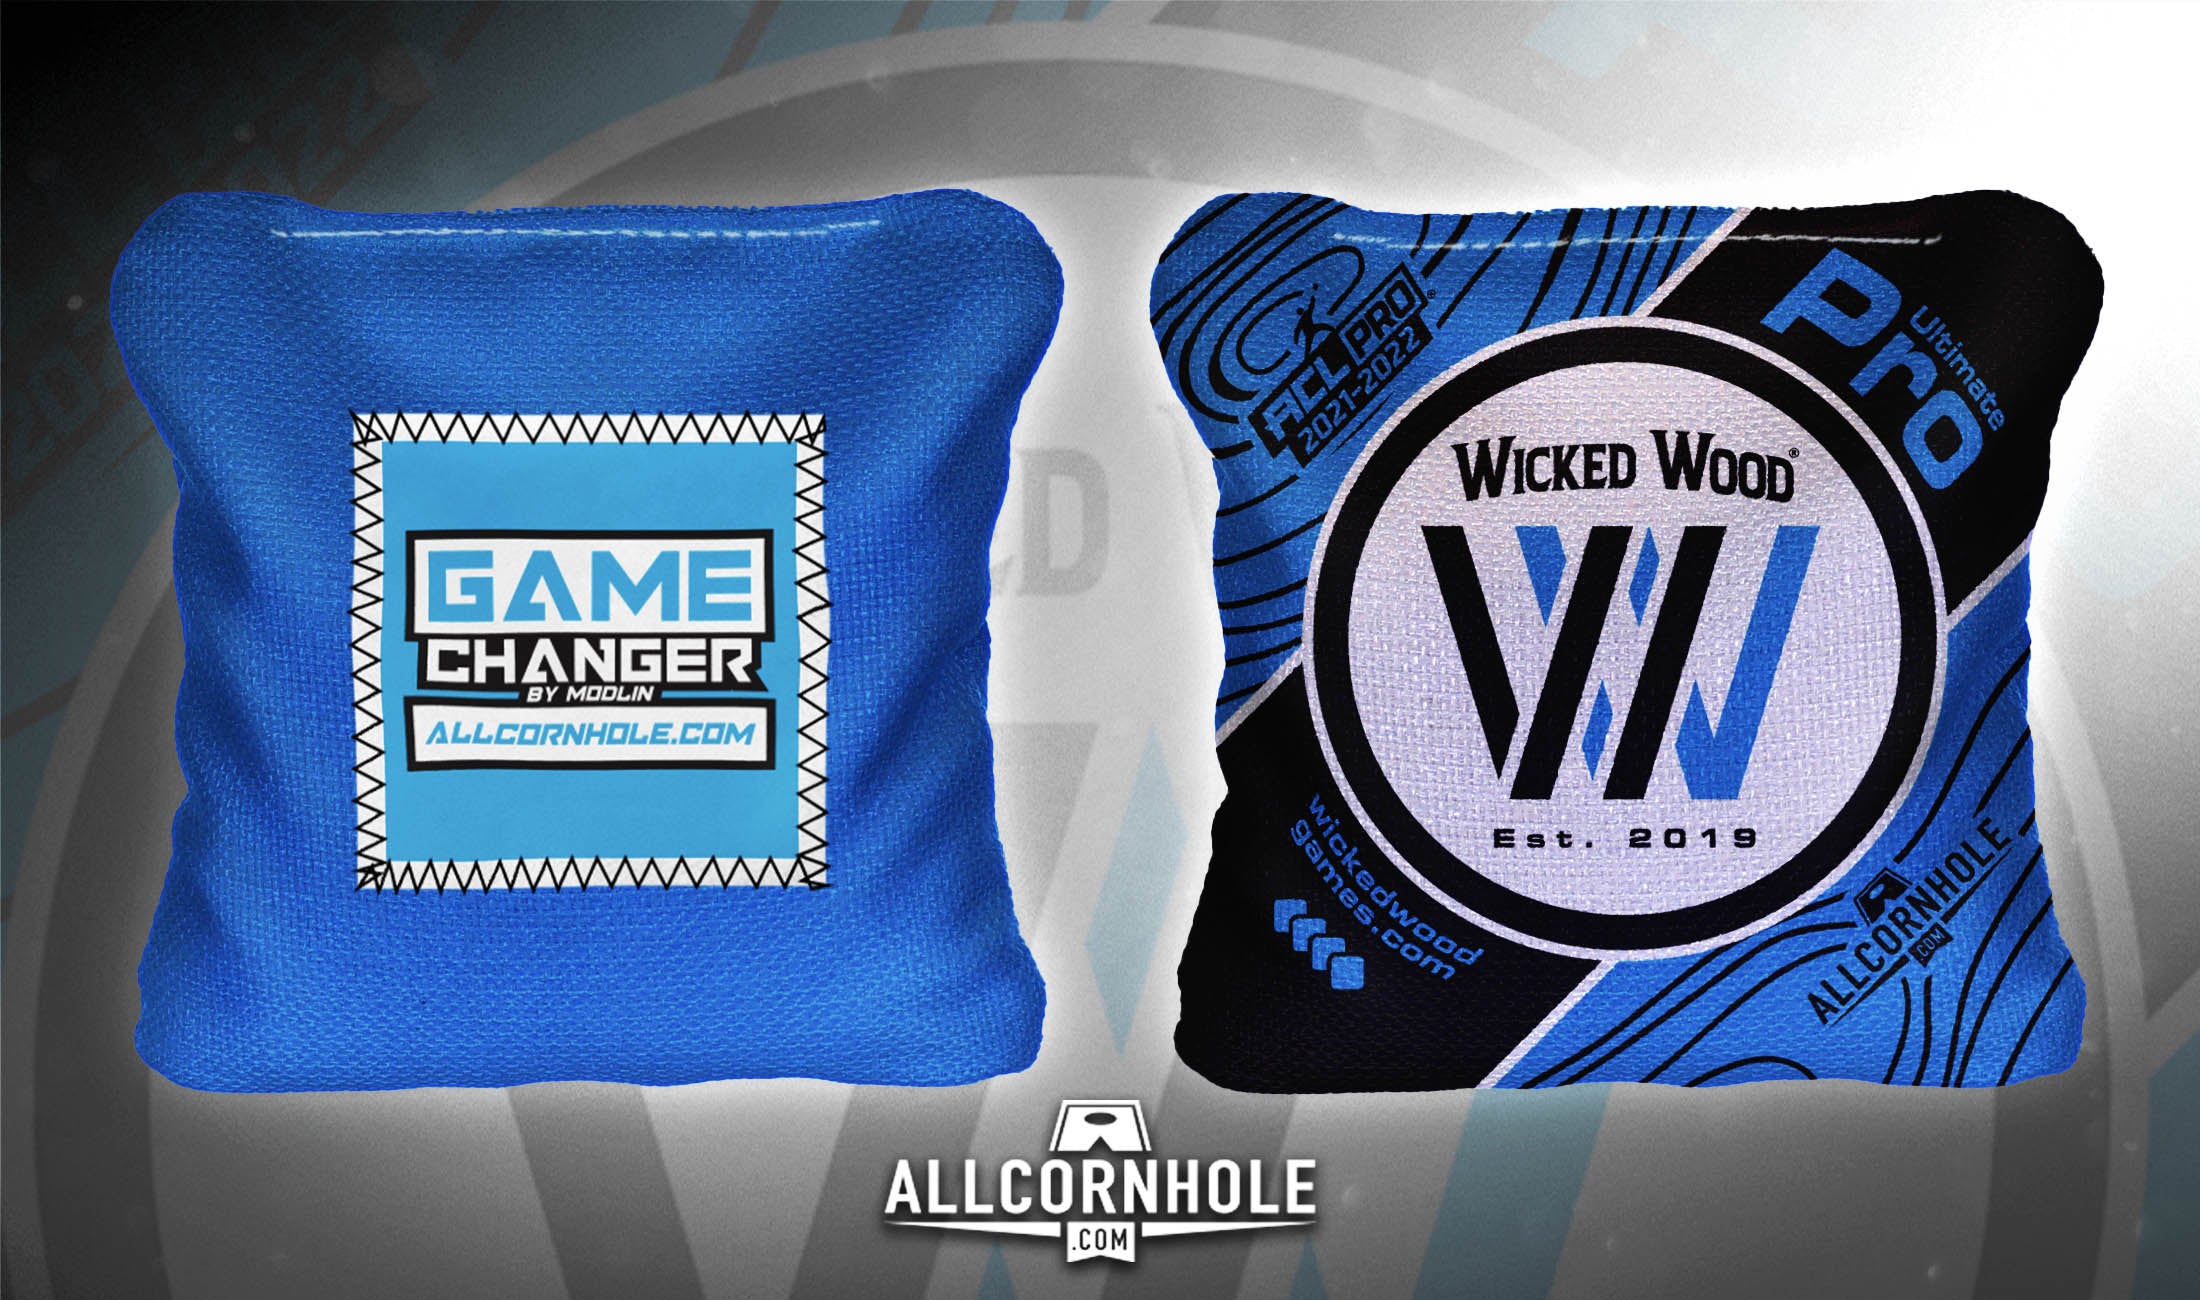 Wicked Wood Pro Bags - GameChanger 1x4 - Wicked Wood Games